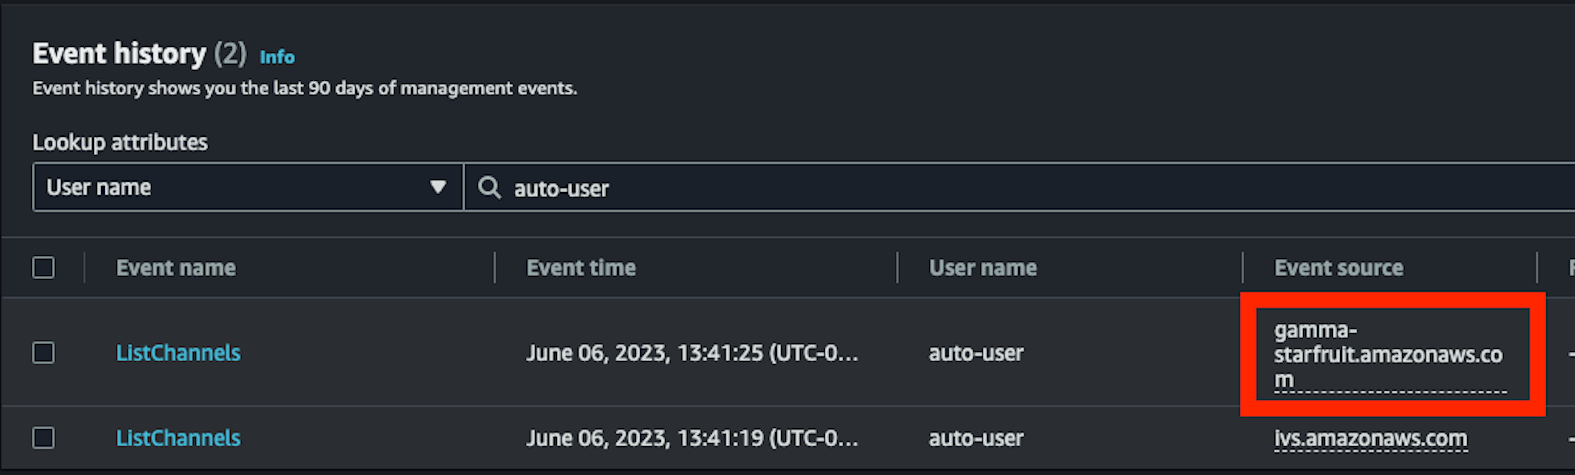 Showing a CloudTrail log with a non-standard event source.